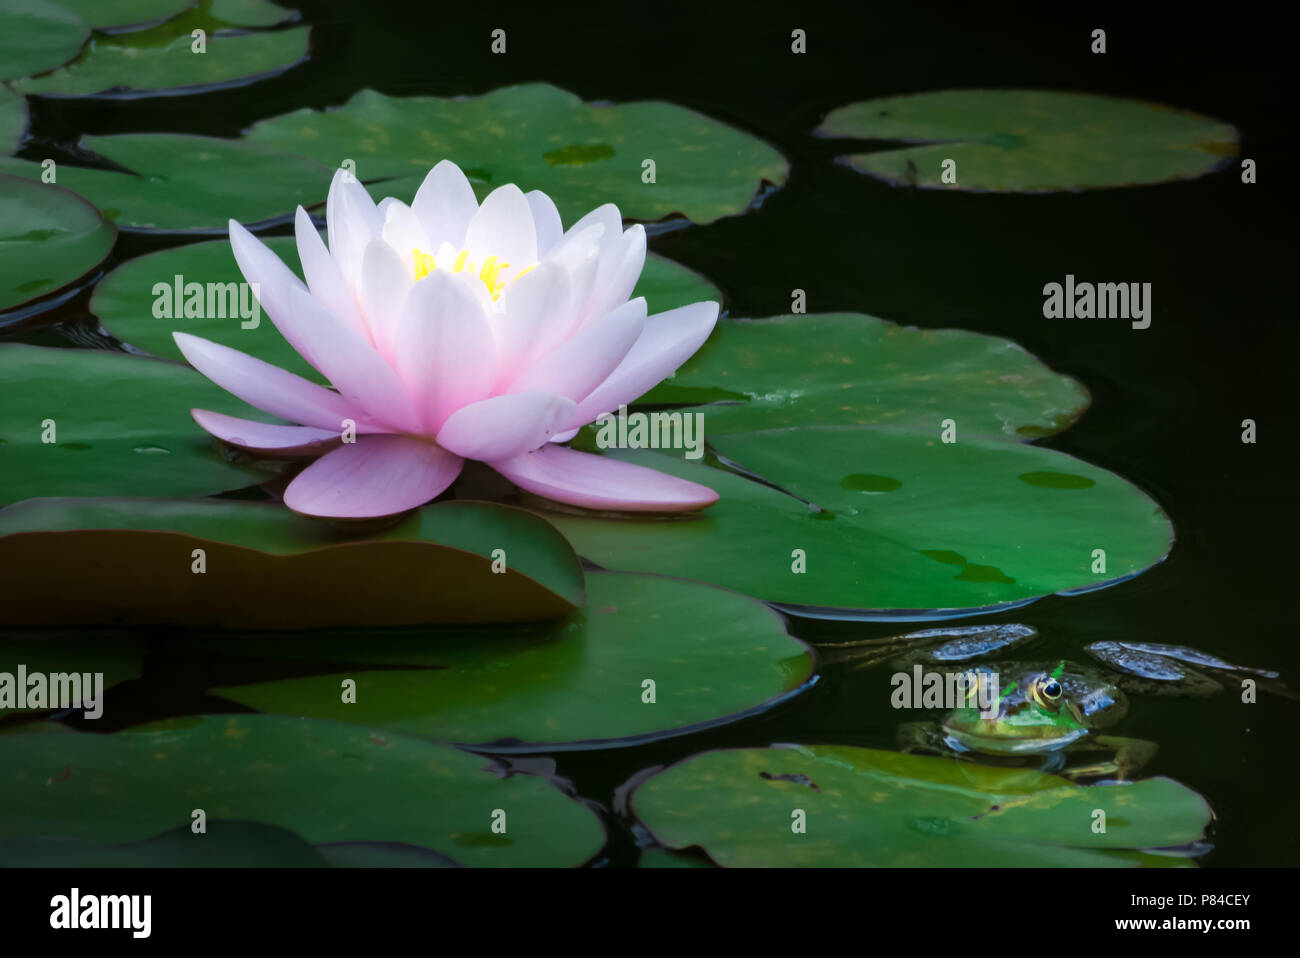 Stunning Water Lily and a Chilling Frog on a Petal, Springtime in a Pond Stock Photo